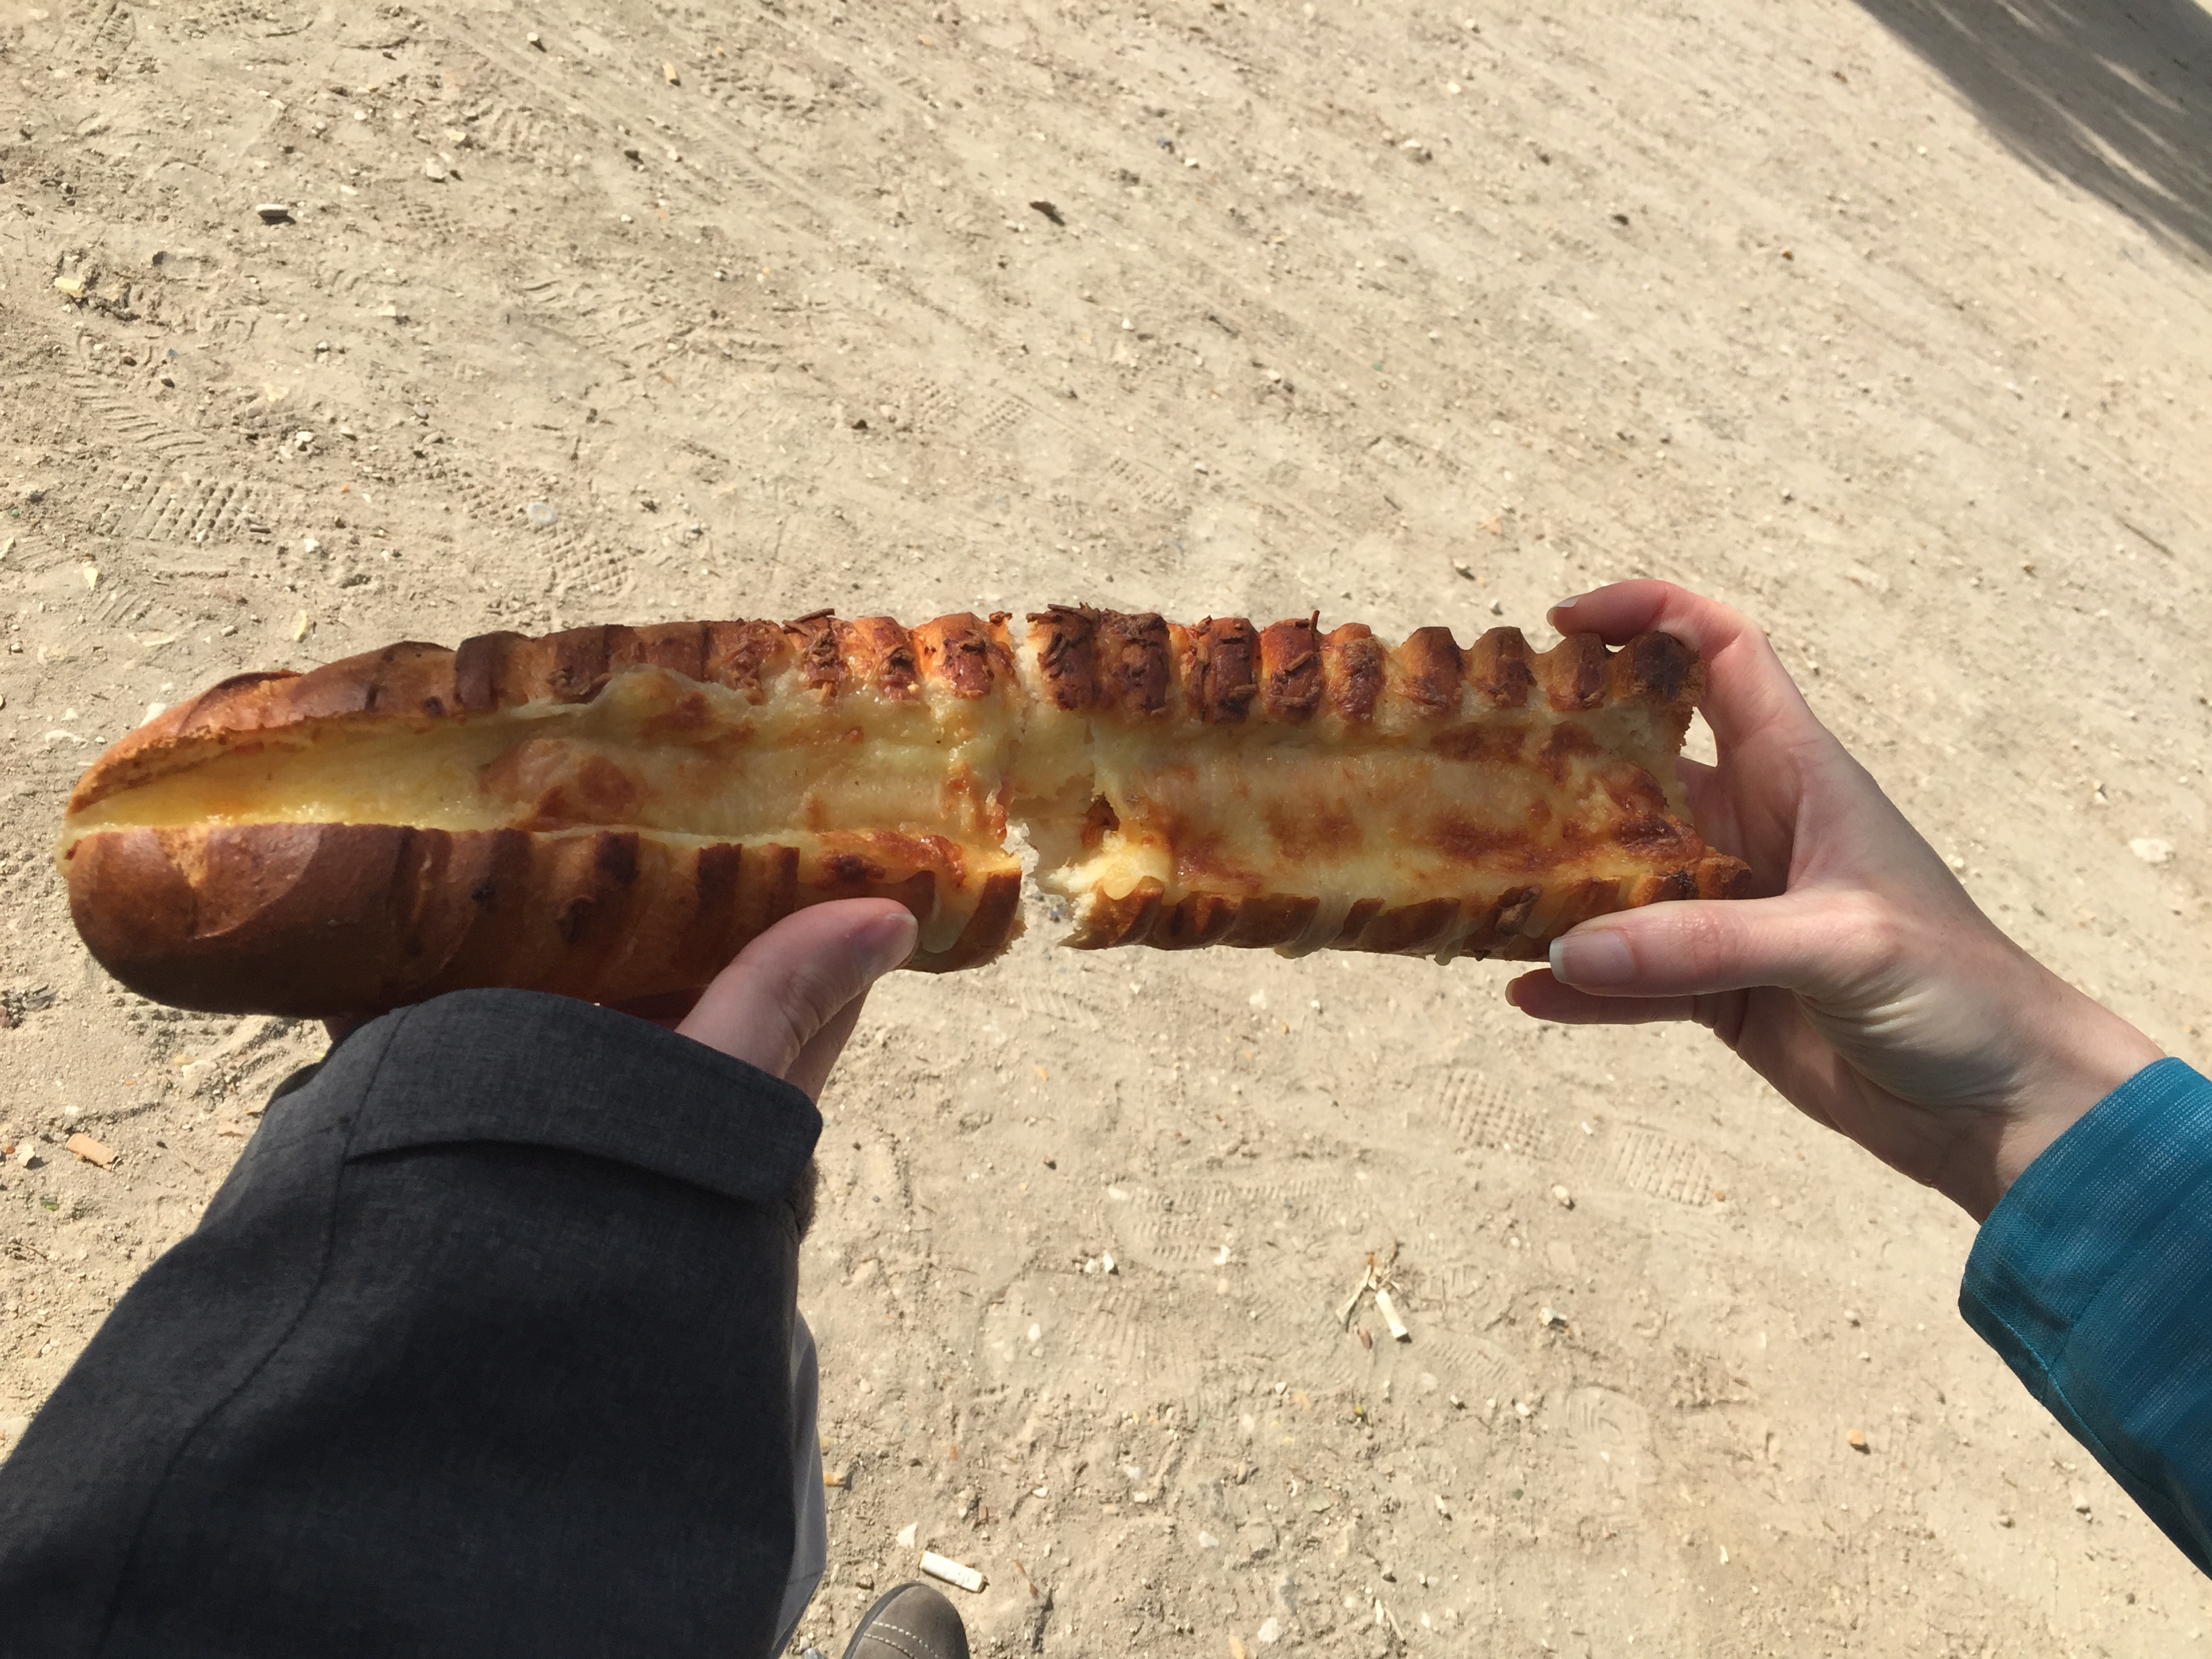 Extra long parisian hot dog in baguette with cheese on top.